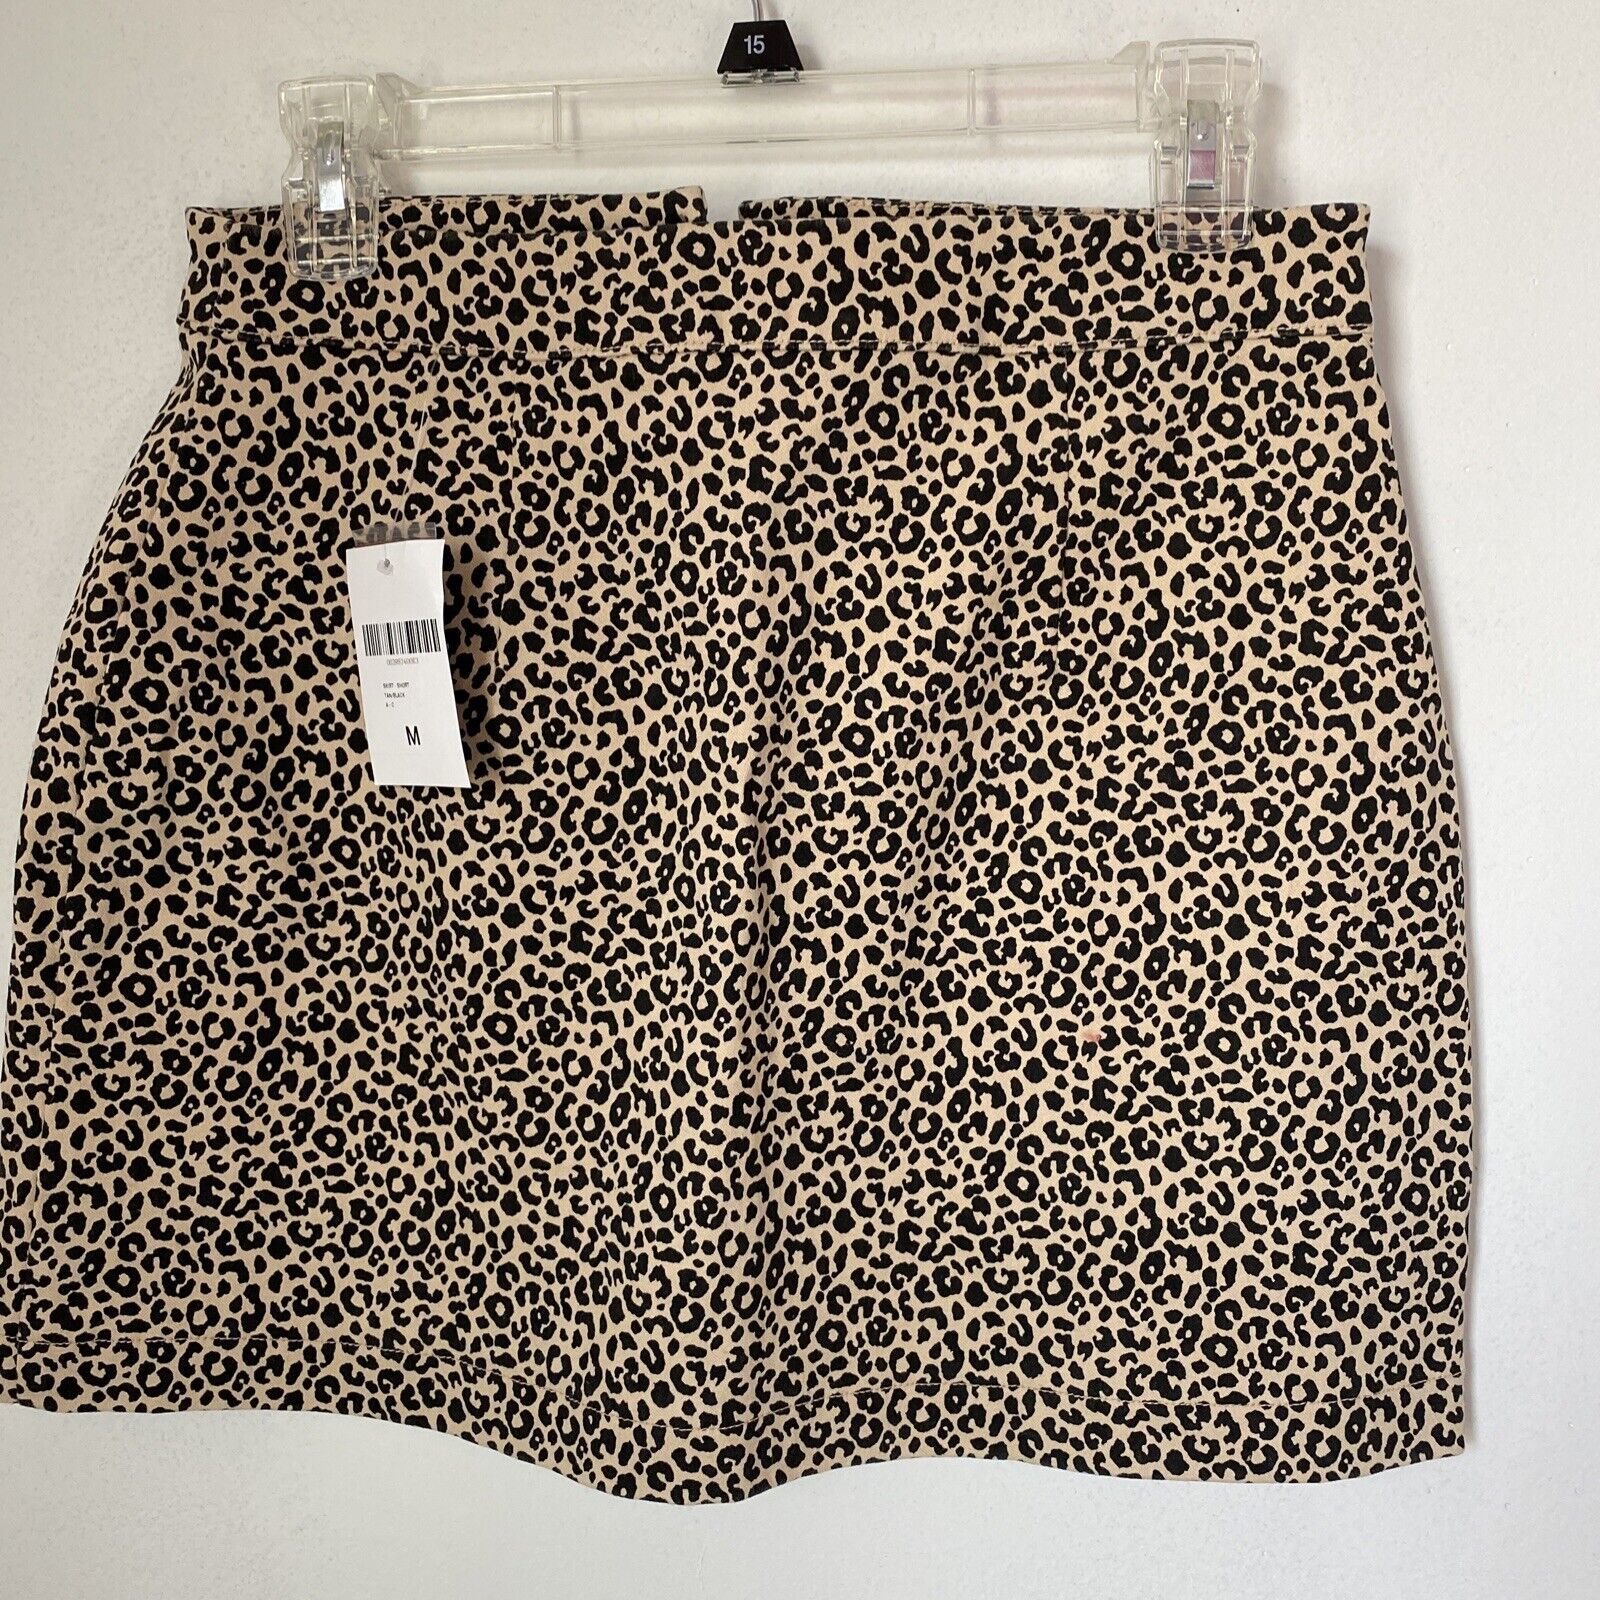 Primary image for Forever 21  Animal Print Junior Size  Skirt With tags.  size Medium.